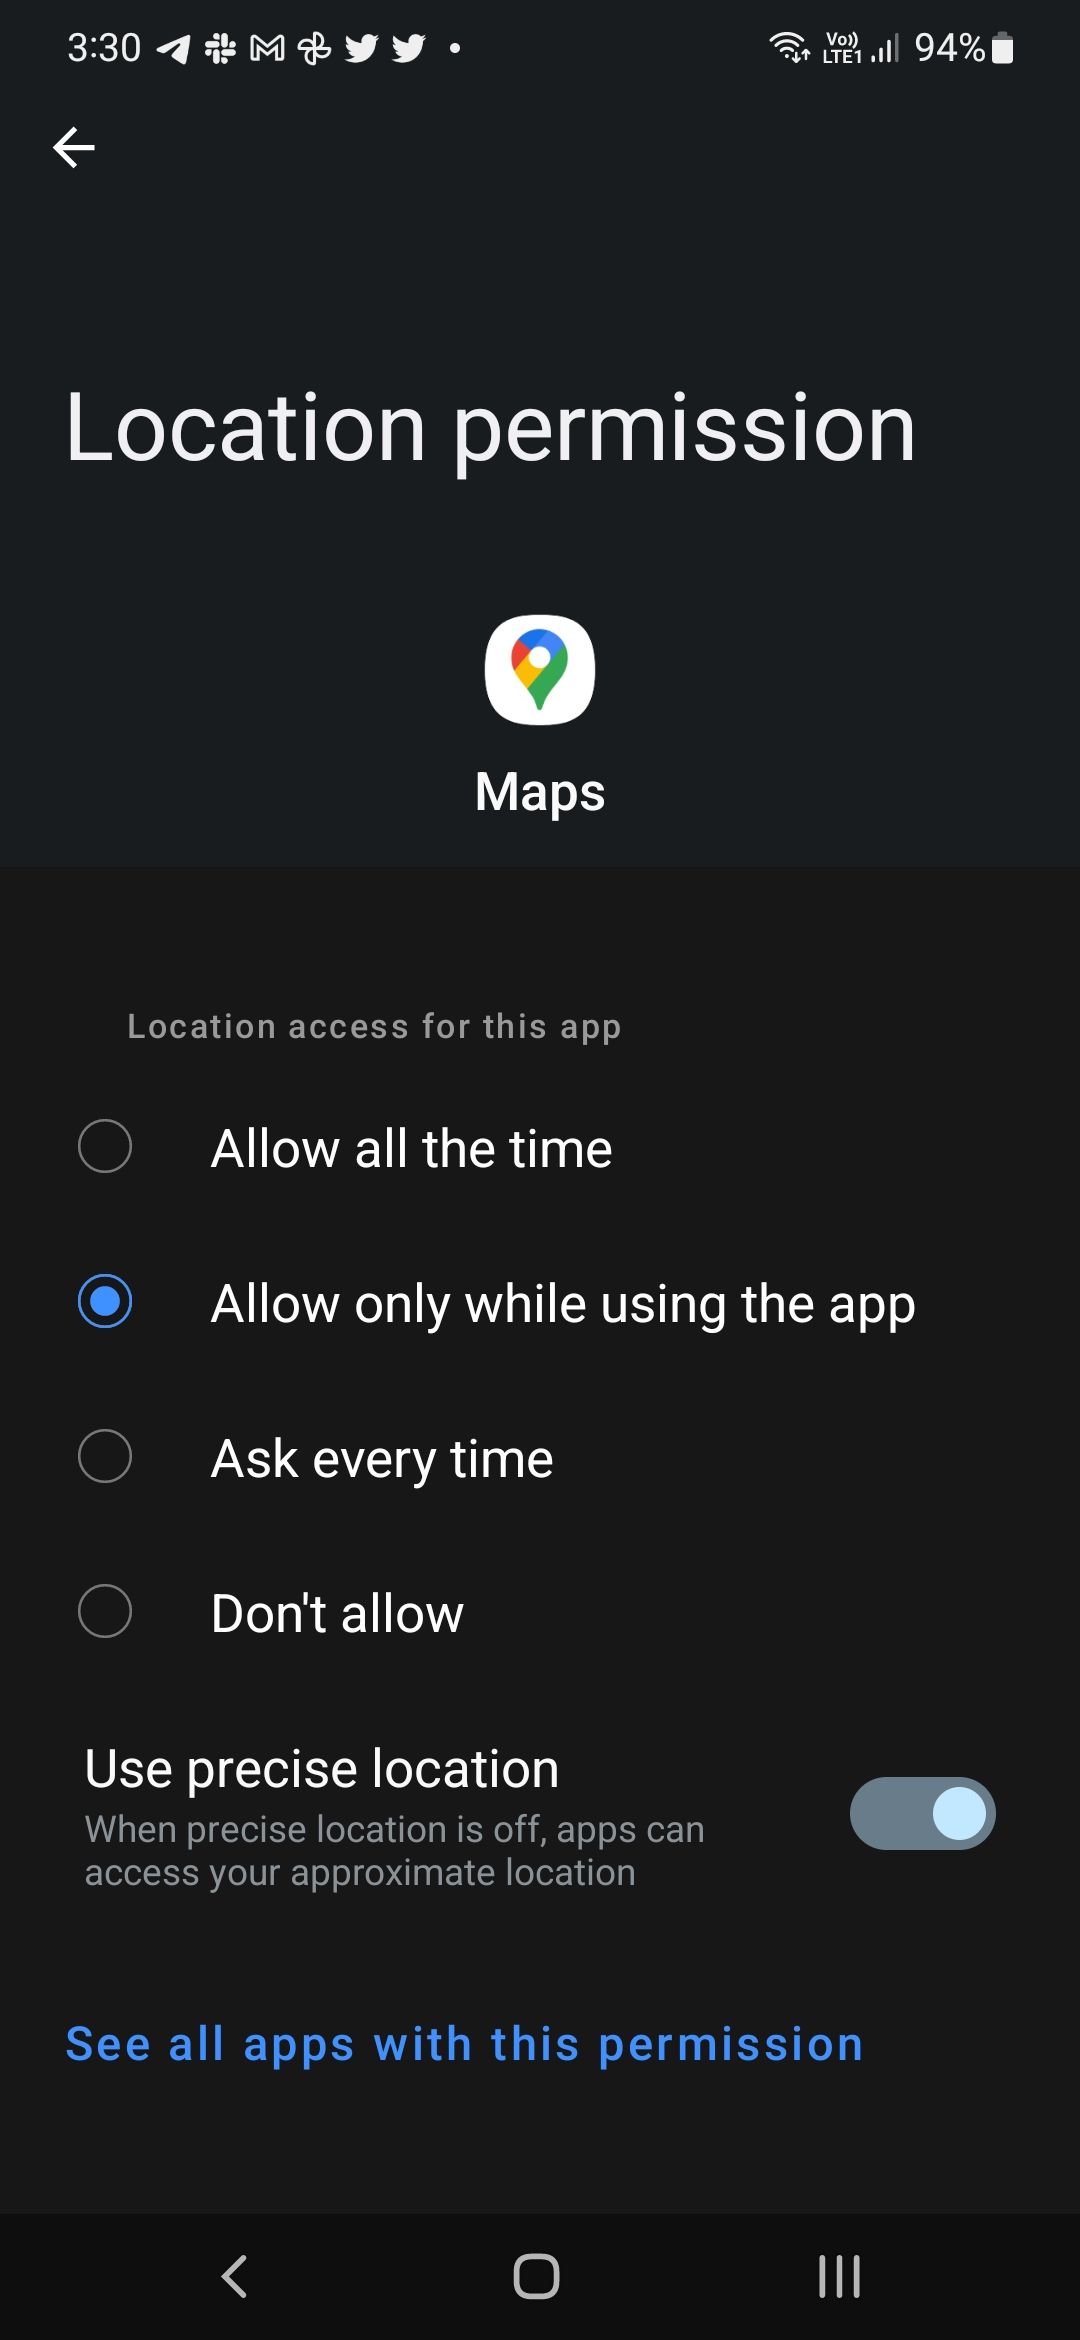 Real time location permission Maps